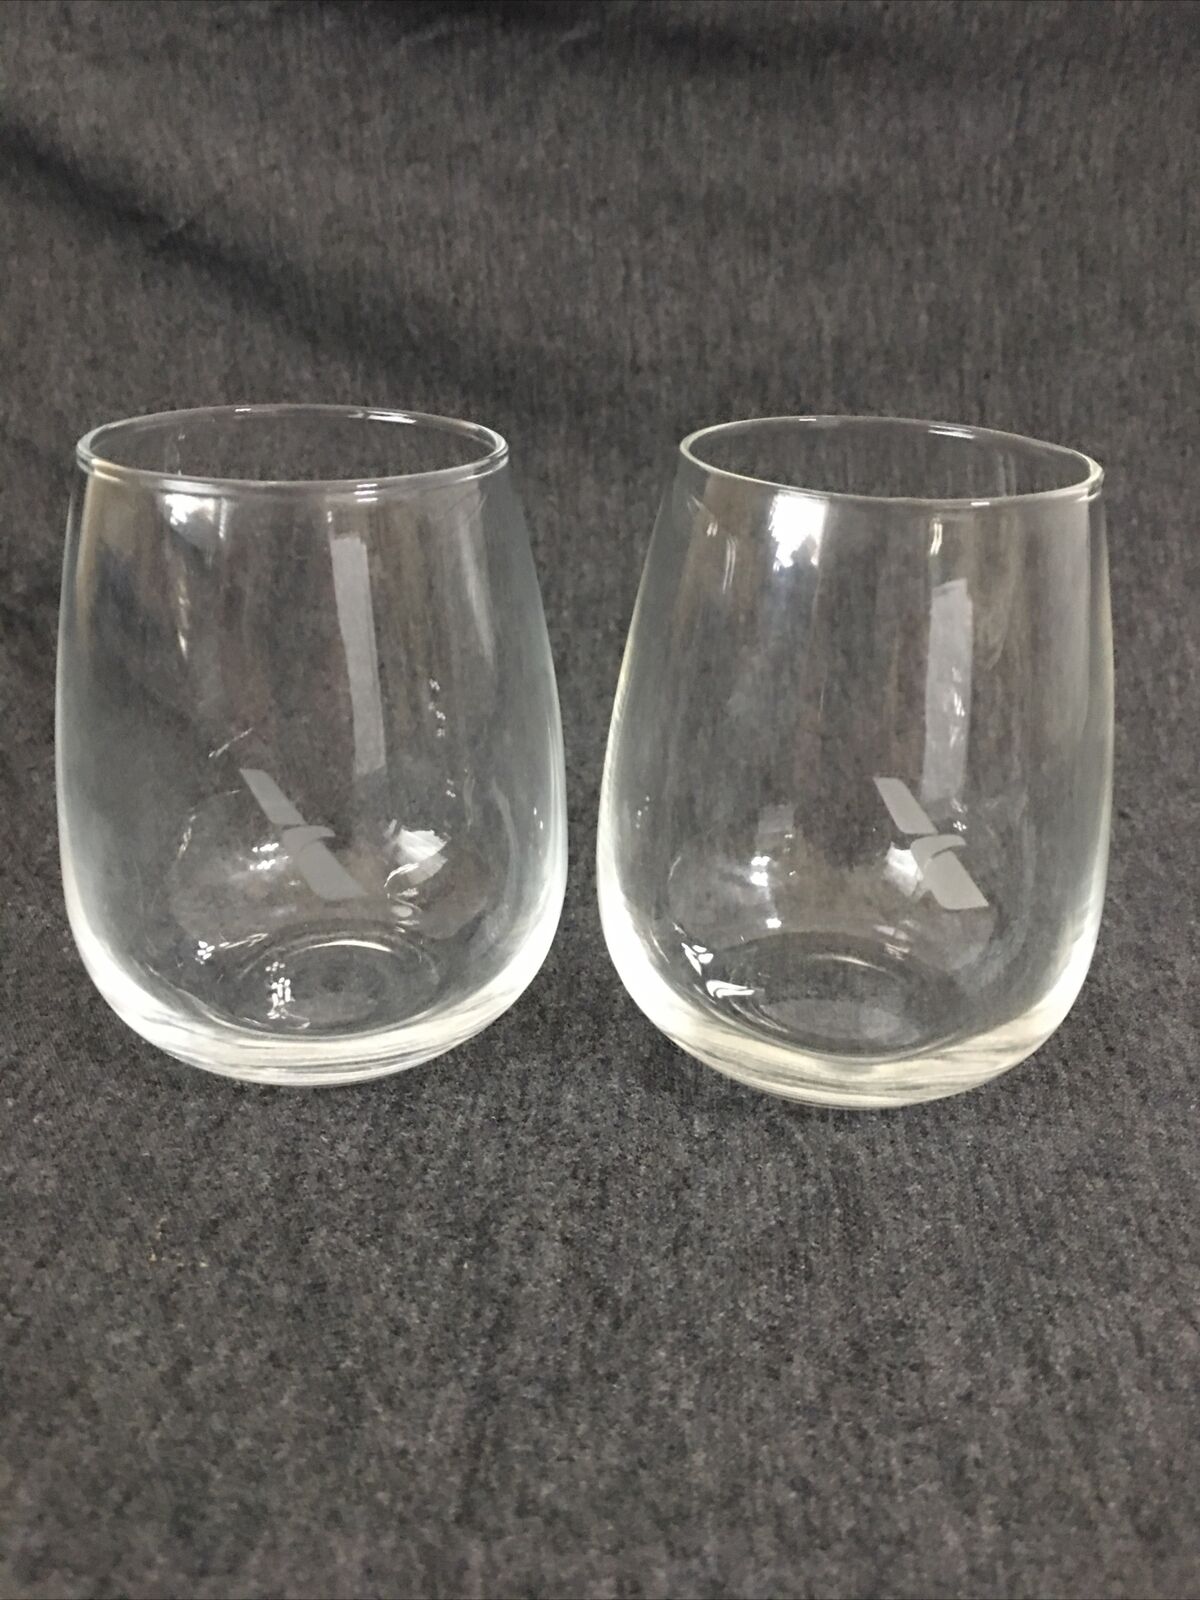 2 AMERICAN AIRLINES FIRST CLASS WINE GLASSES